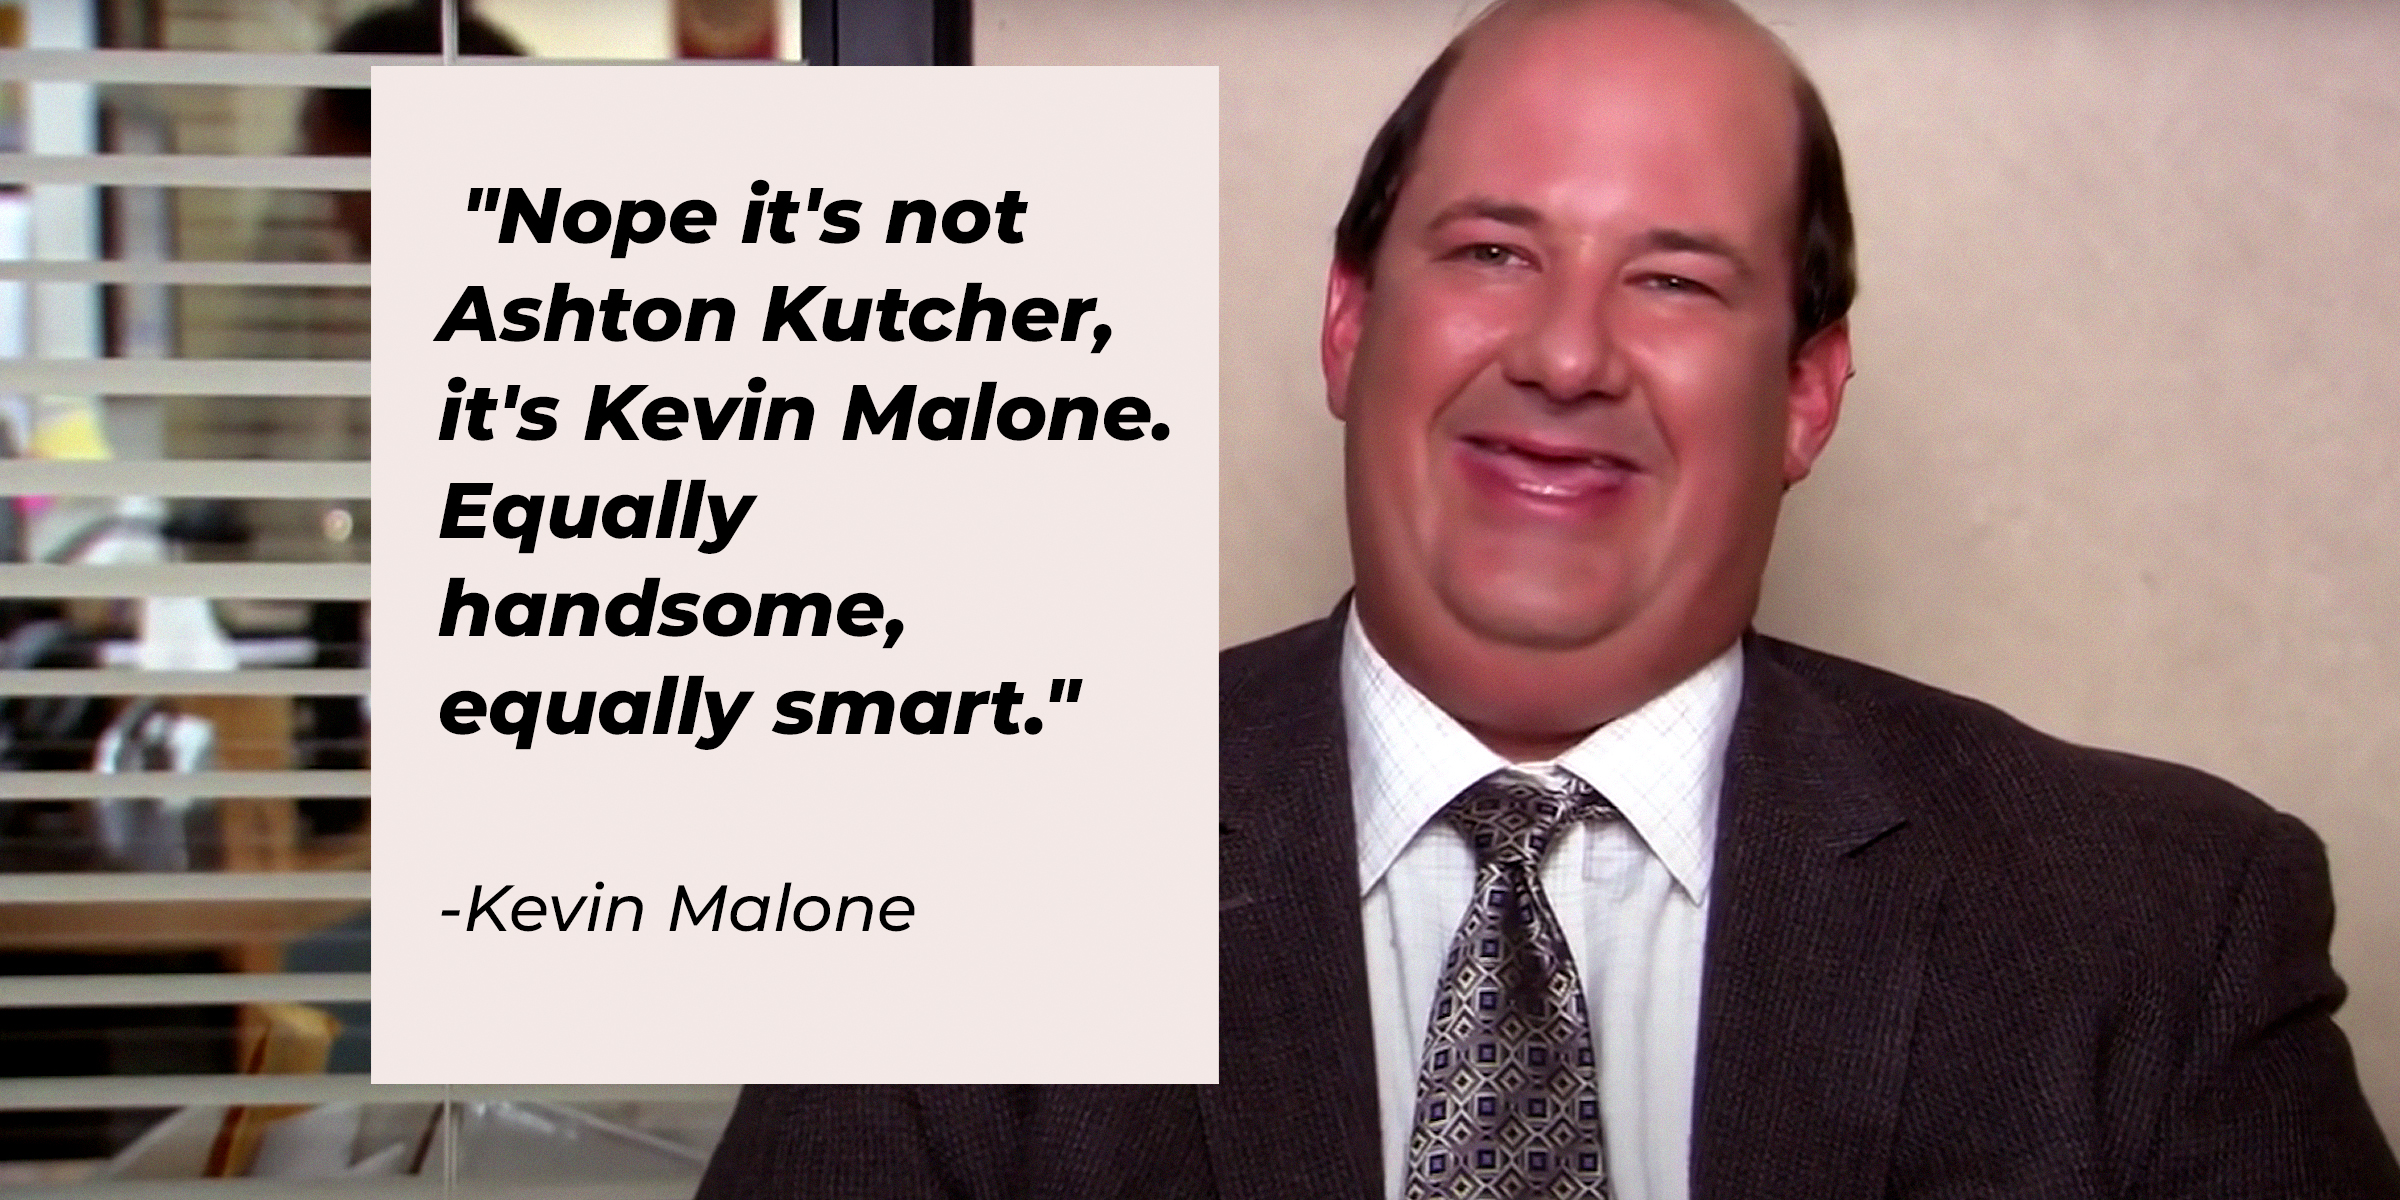 A photo of Kevin Malone with the quote: "Nope it's not Ashton Kutcher, it's Kevin Malone. Equally handsome, equally smart." | Source: youtube.com/TheOffice